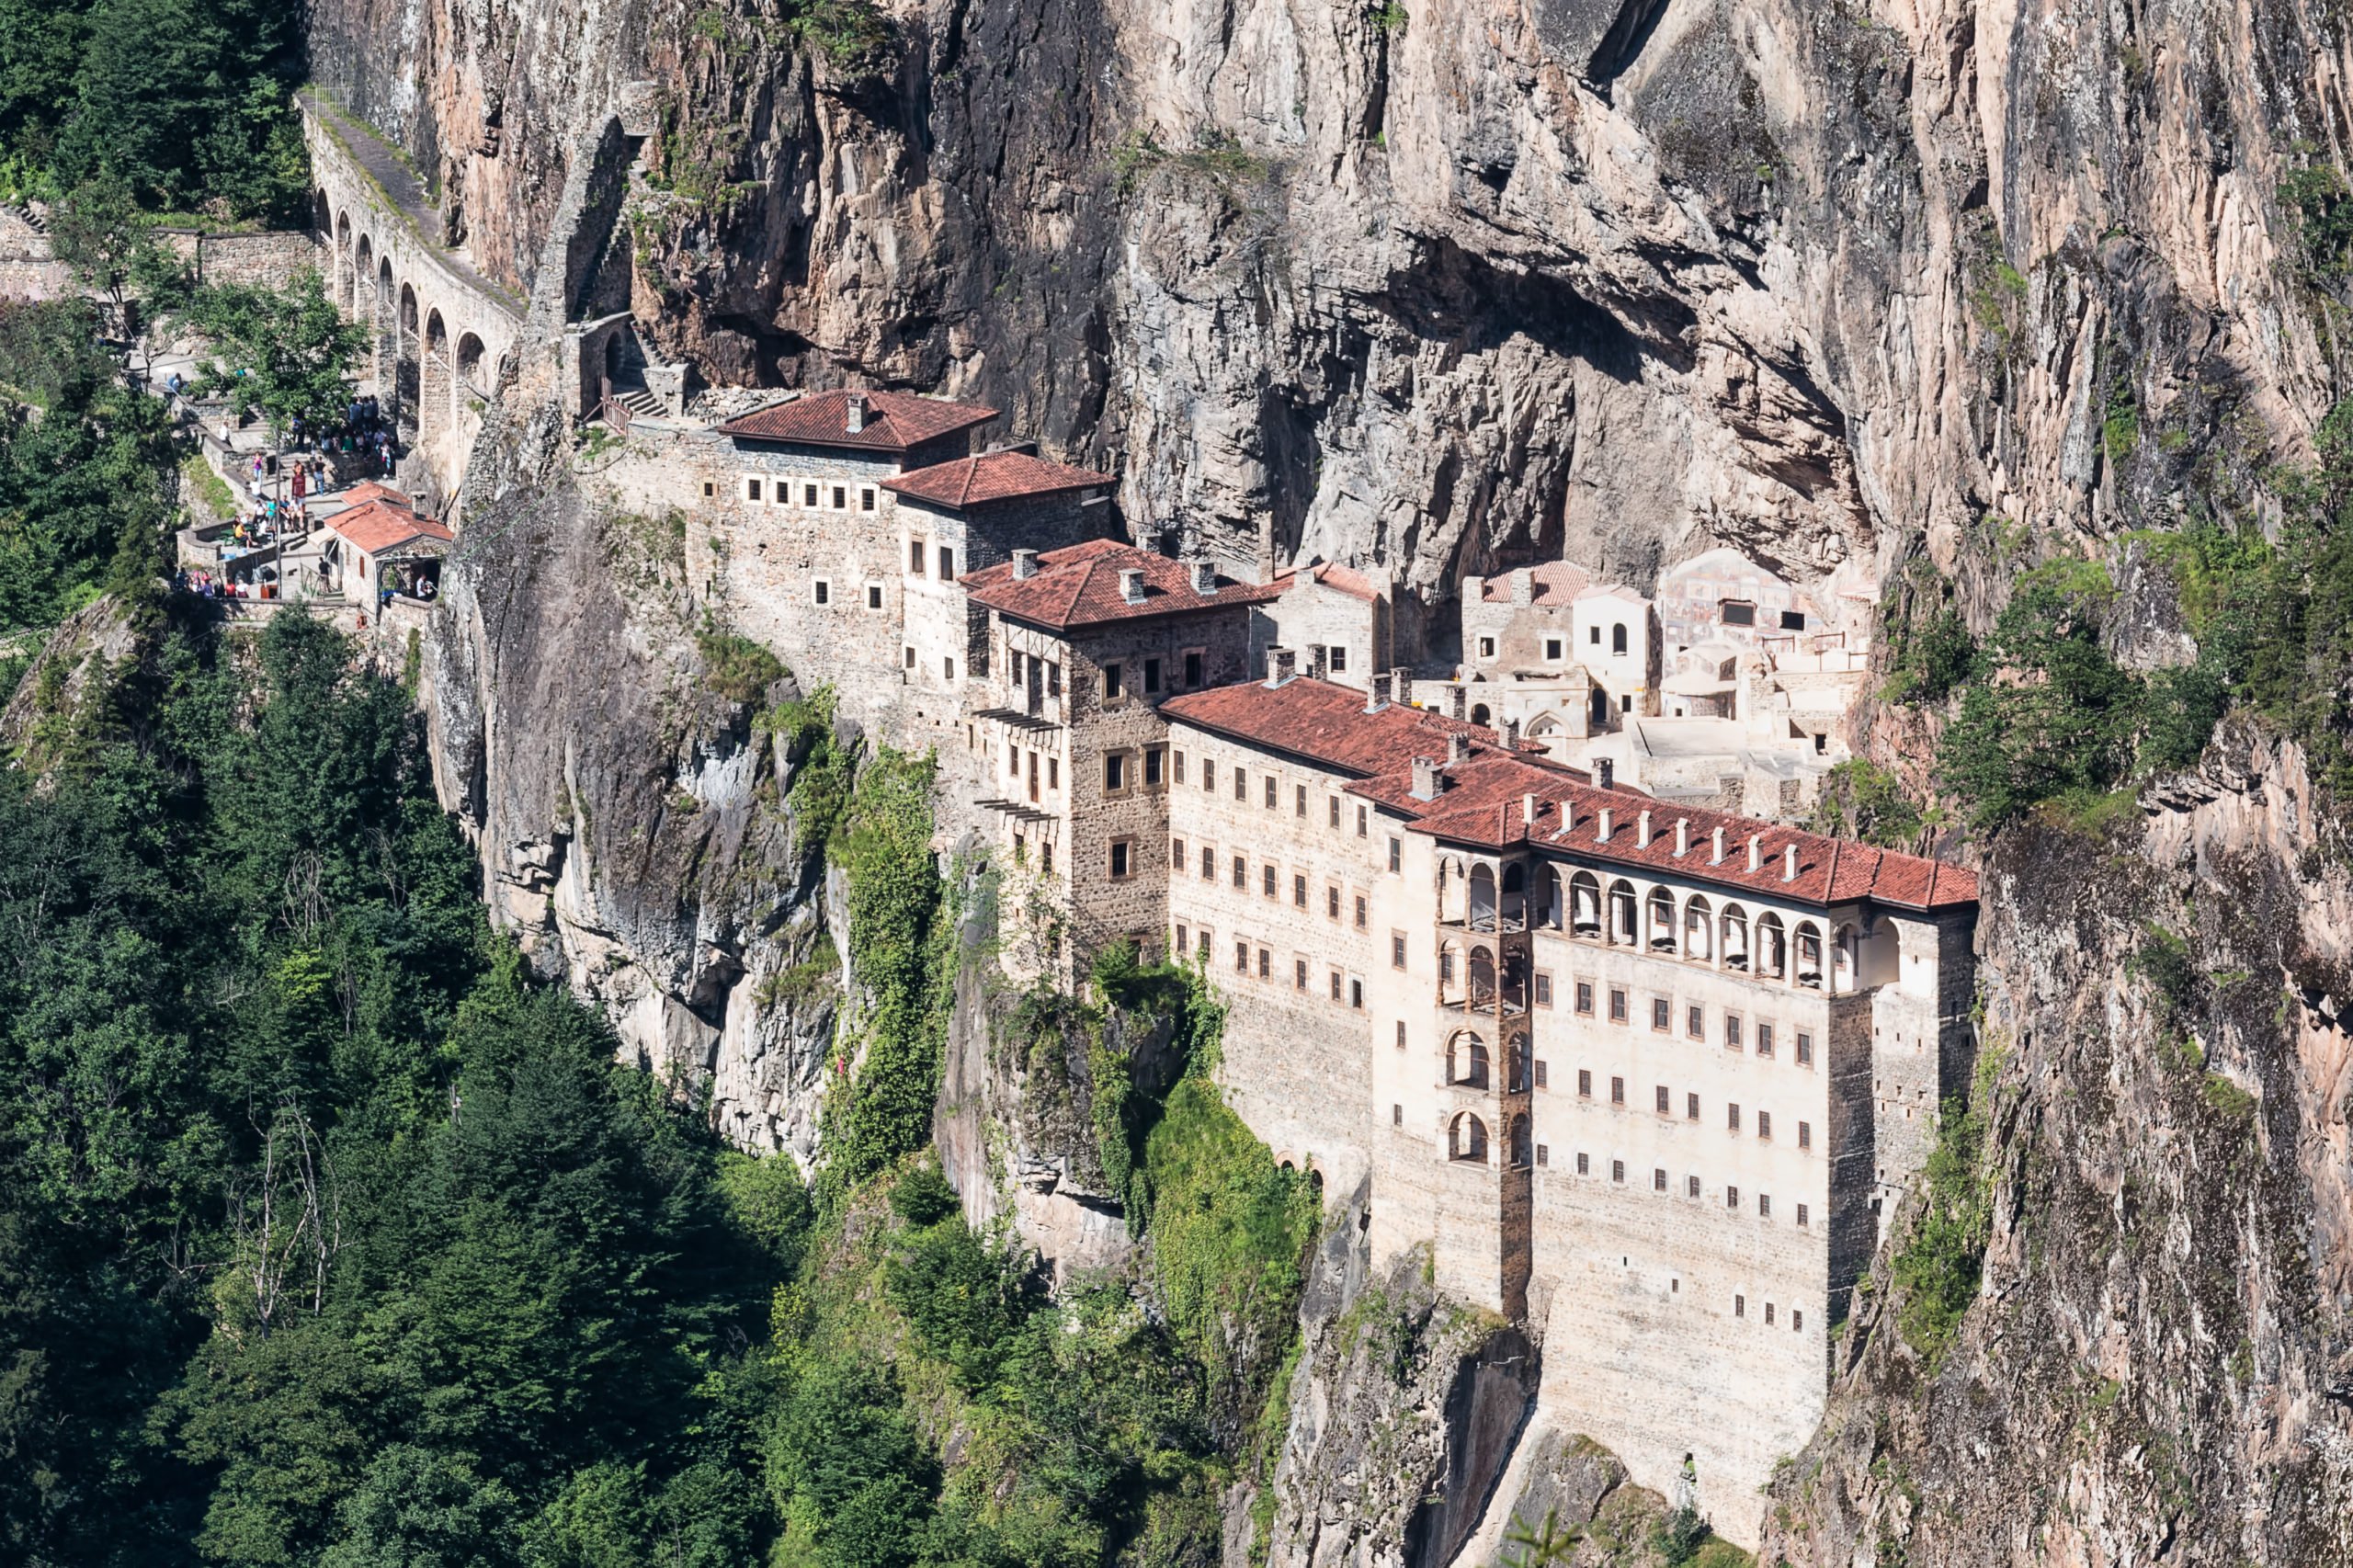 Admire The Beincredible Sumela Monastery On The Sumela Monastery Tour From Trabzon